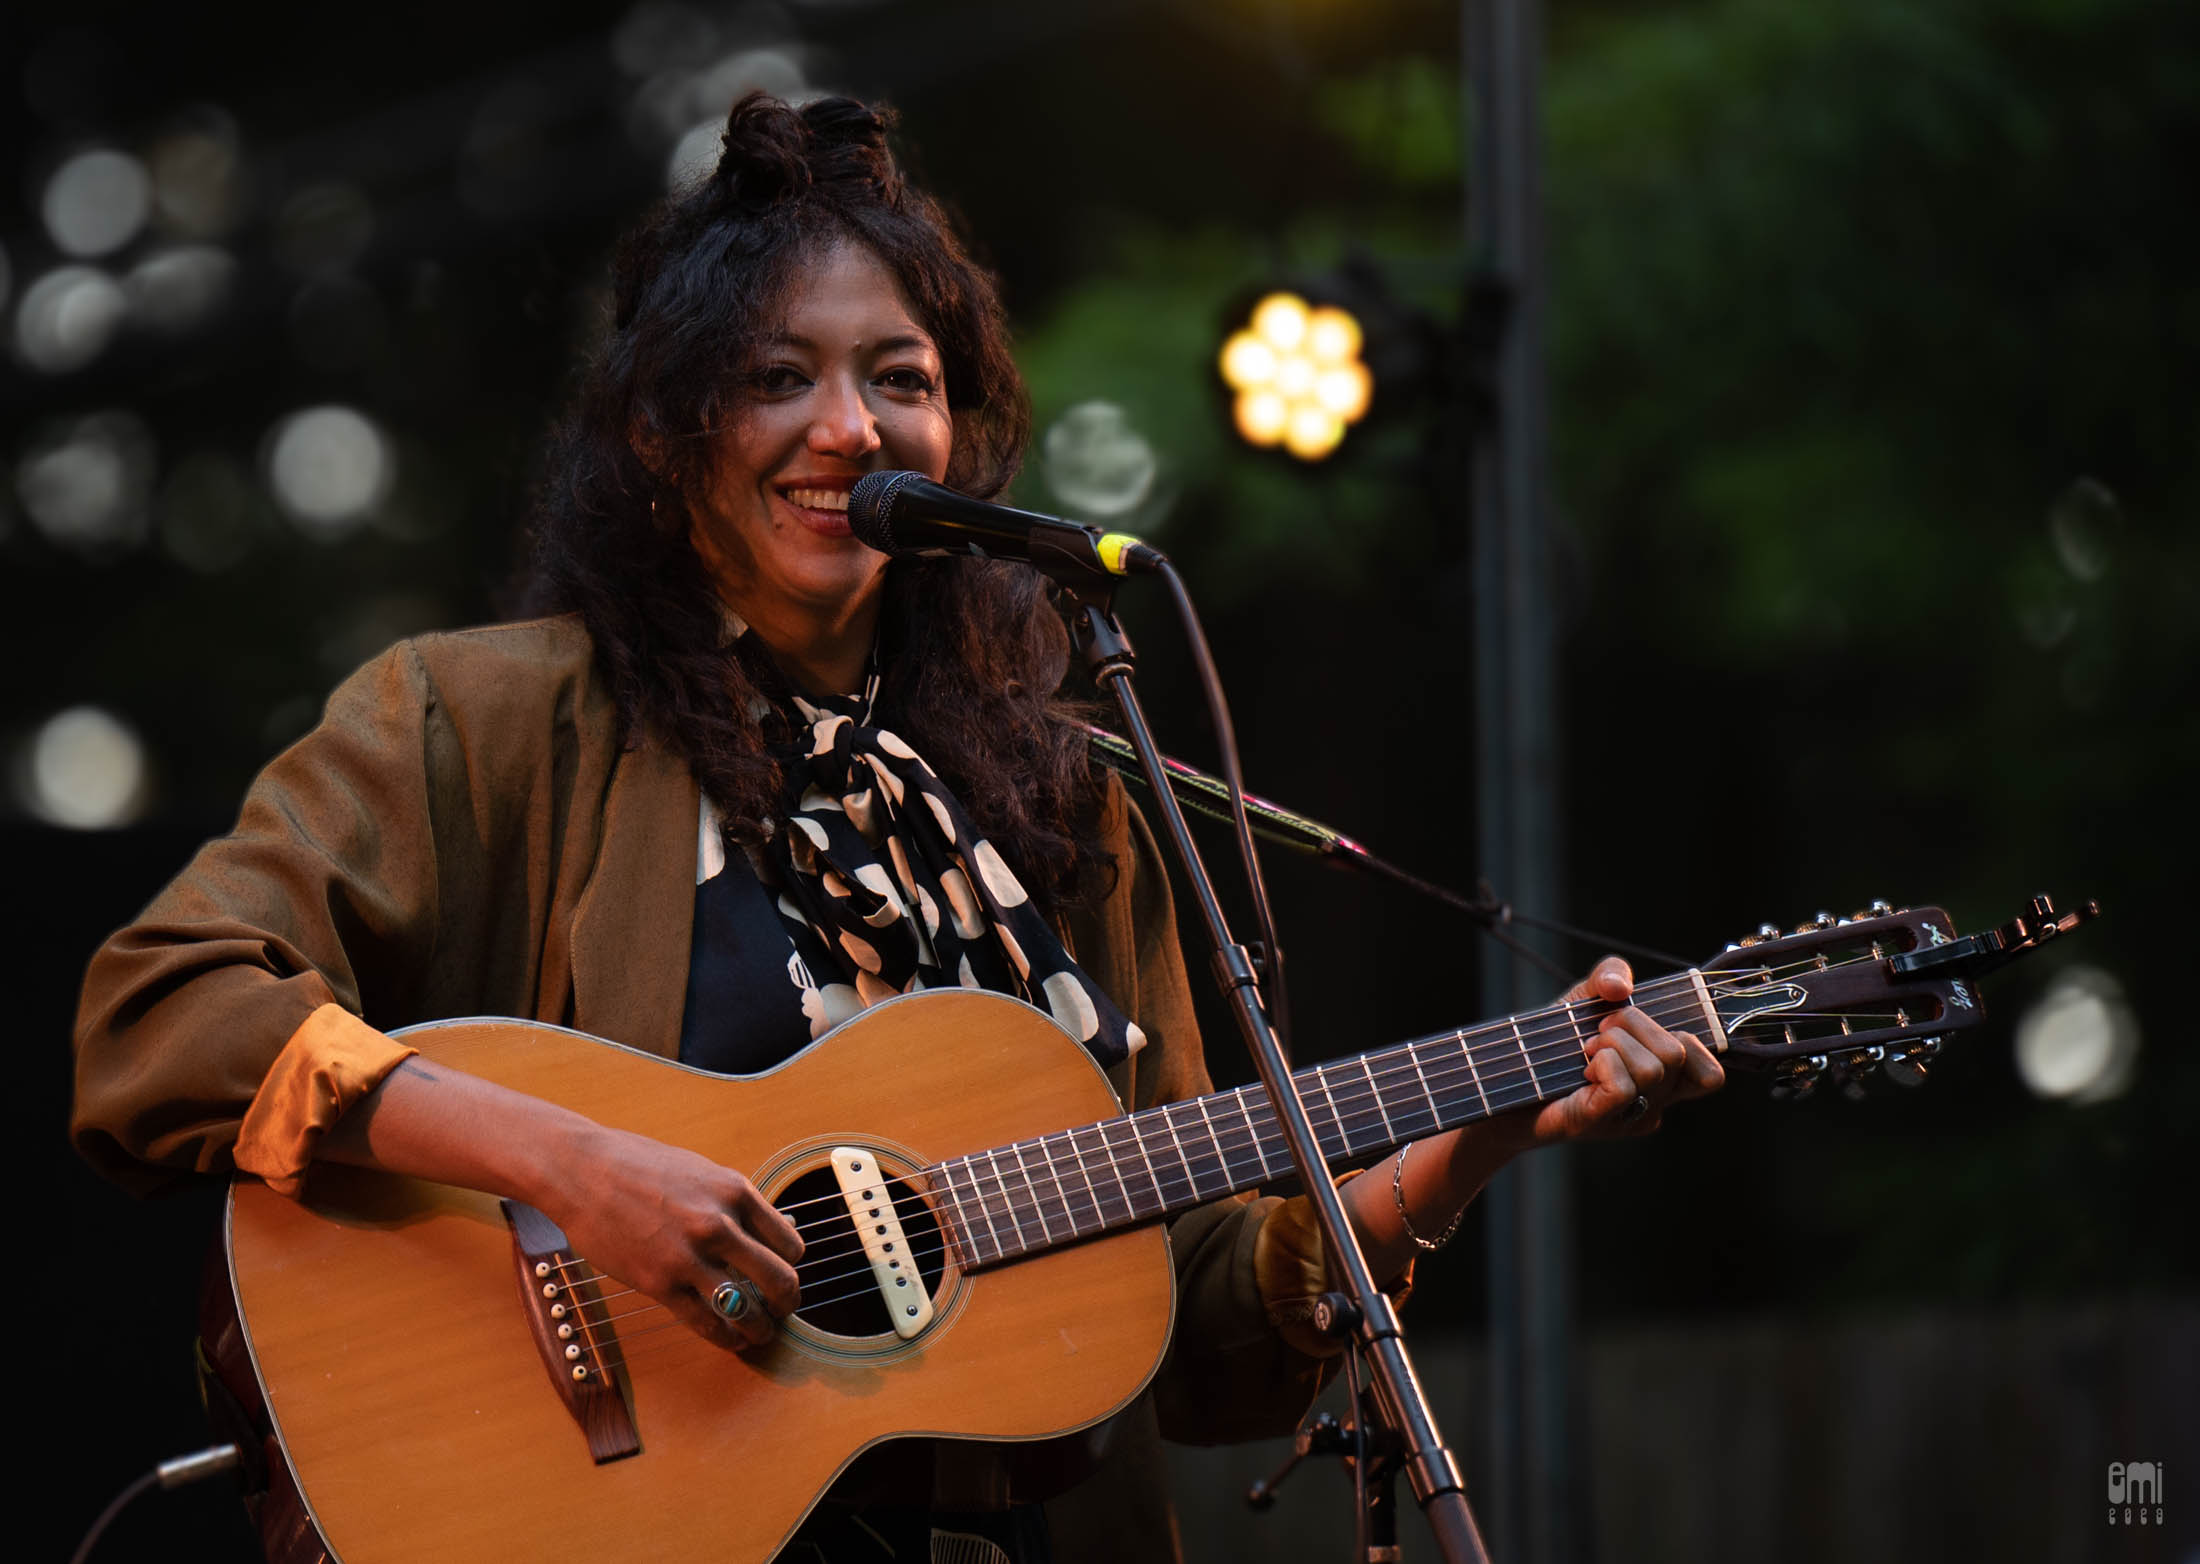 2023.5.18 Shana Cleveland at Henry Miller Memorial Library, B﻿ig Sur, CA. photo by emi